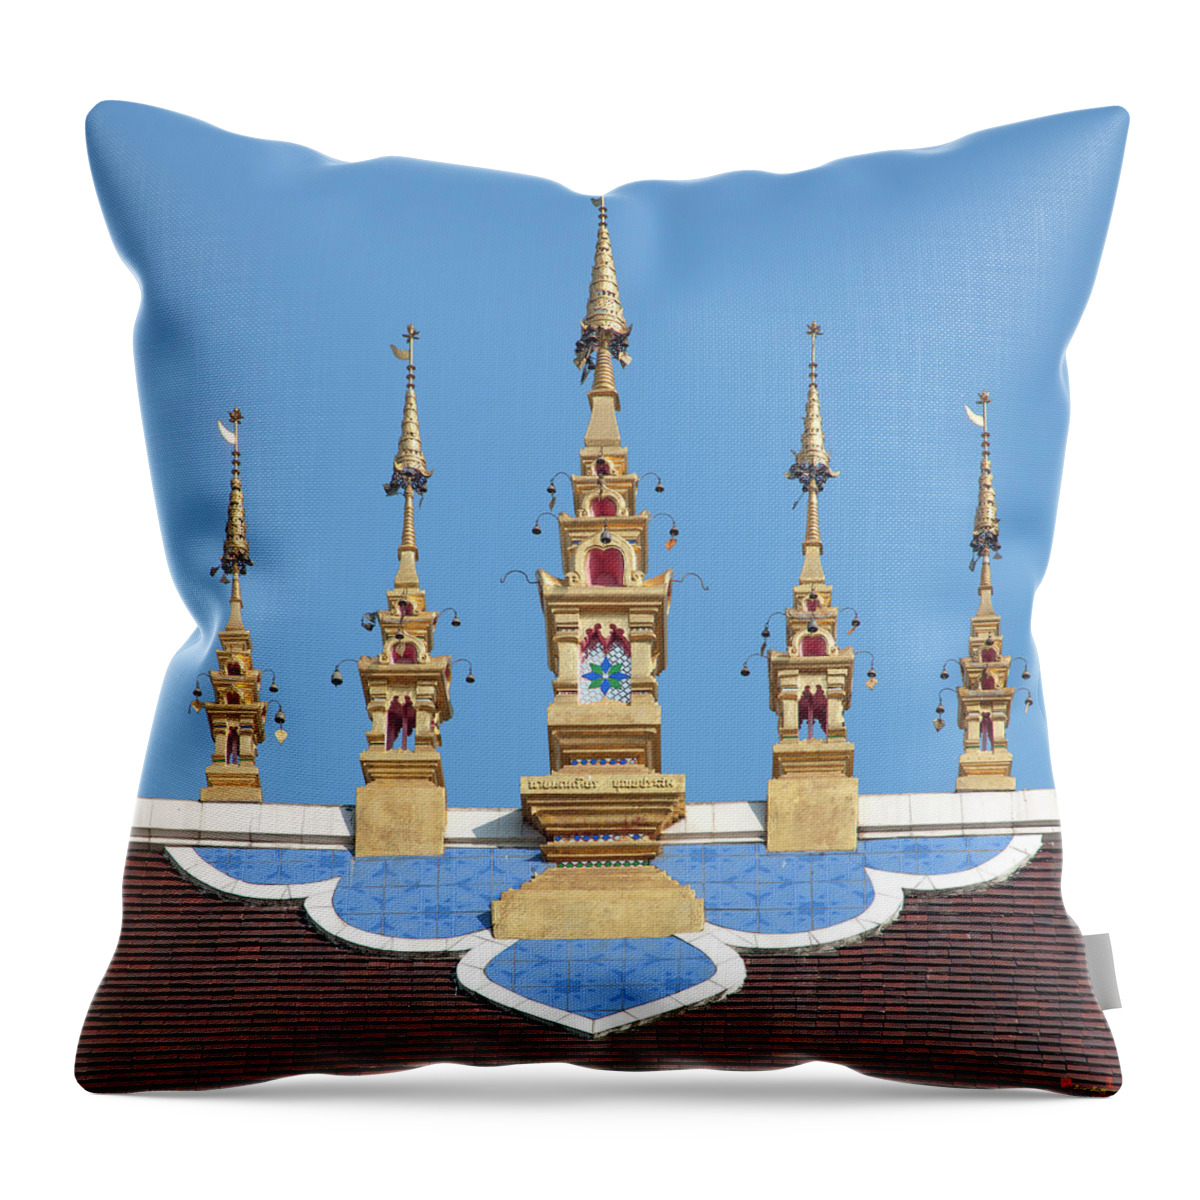 Scenic Throw Pillow featuring the photograph Wat Montien Phra Ubosot Roof Apex DTHCM0528 by Gerry Gantt